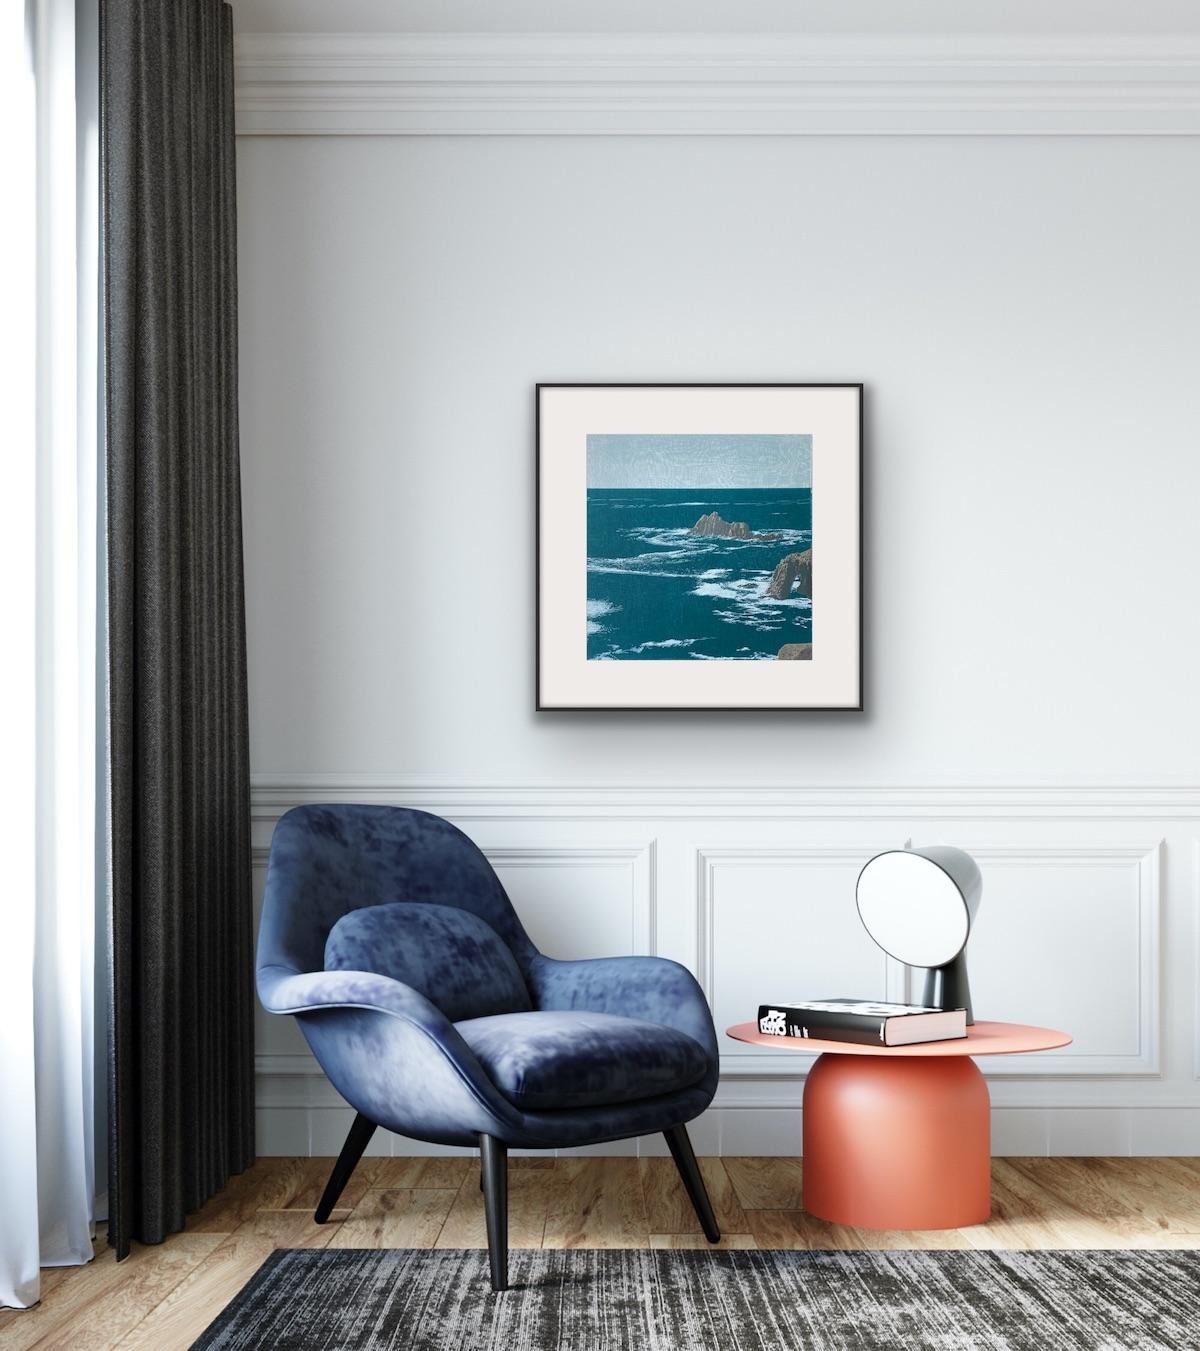 Anna Harley
Land’s End: Cornish Coastal Path Series
Limited Edition Screen Print
Hand signed by the artist 
Edition of 30
Sheet size H 56 x W 56 x D 0.1cm
Sold Unframed
Please note that the insitu images are purely an indication of how a piece may